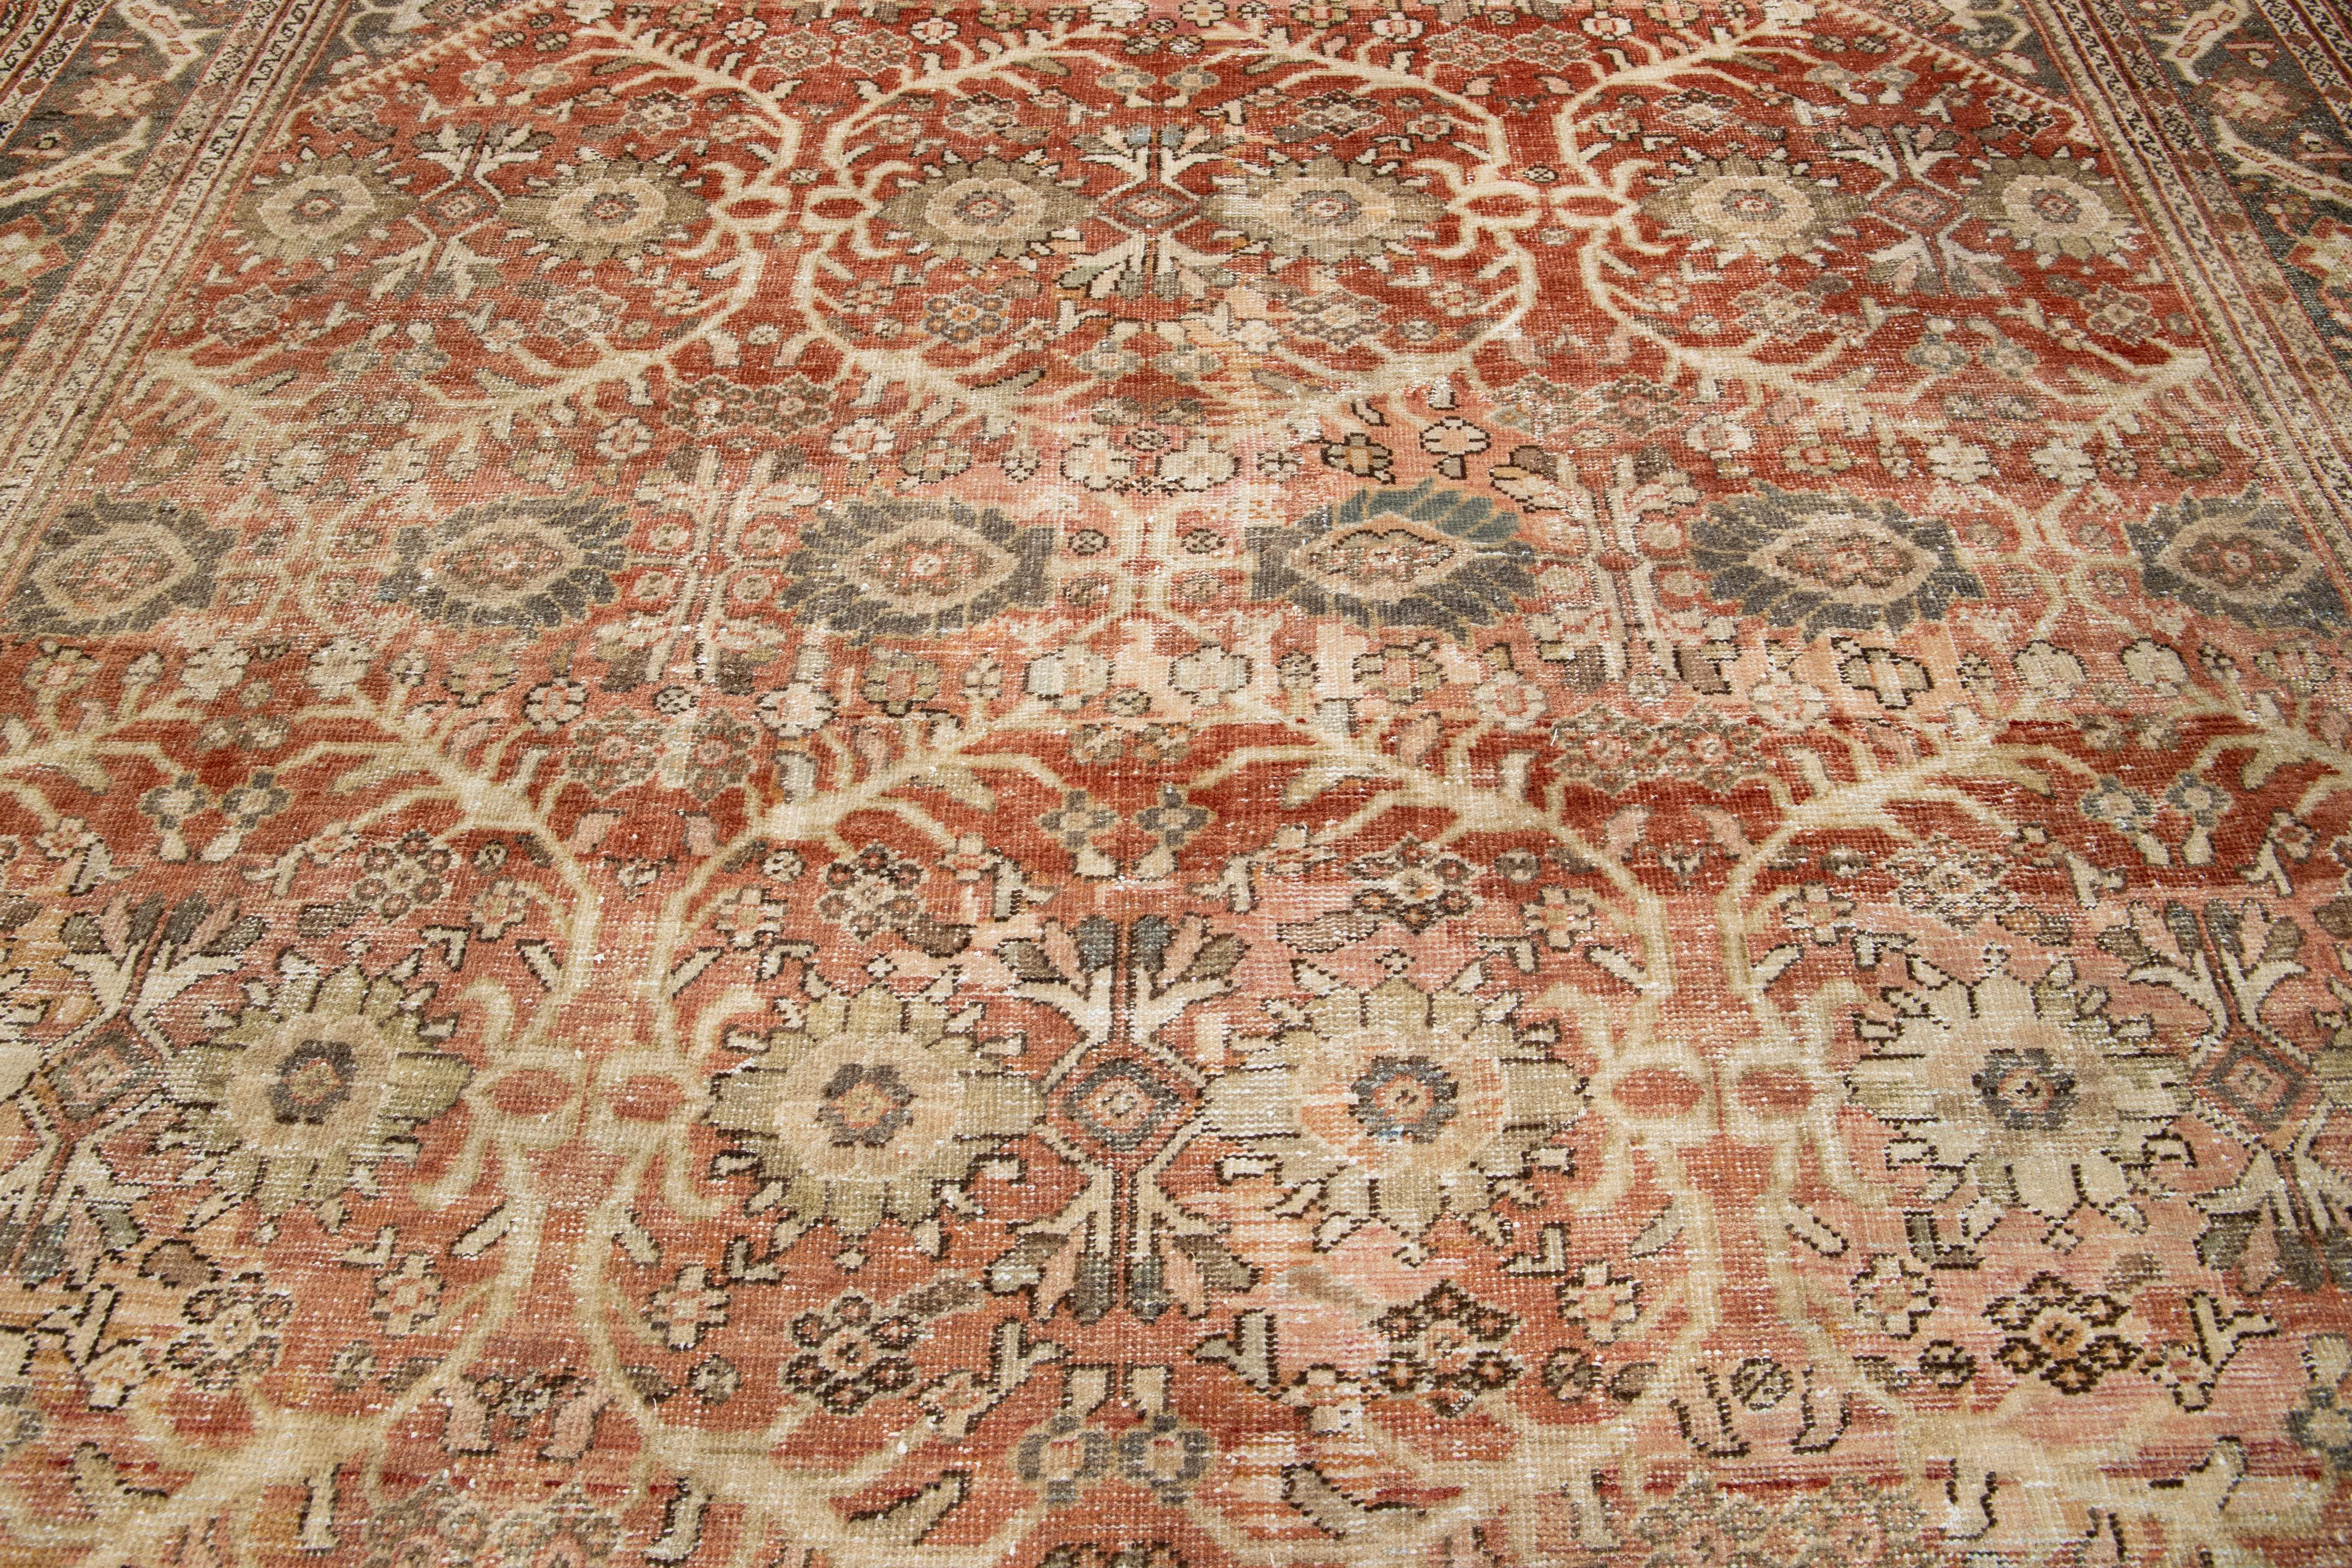 19th Century 10 x 13 Antique Mahal Wool Rug In Rust Color with Allover Motif For Sale